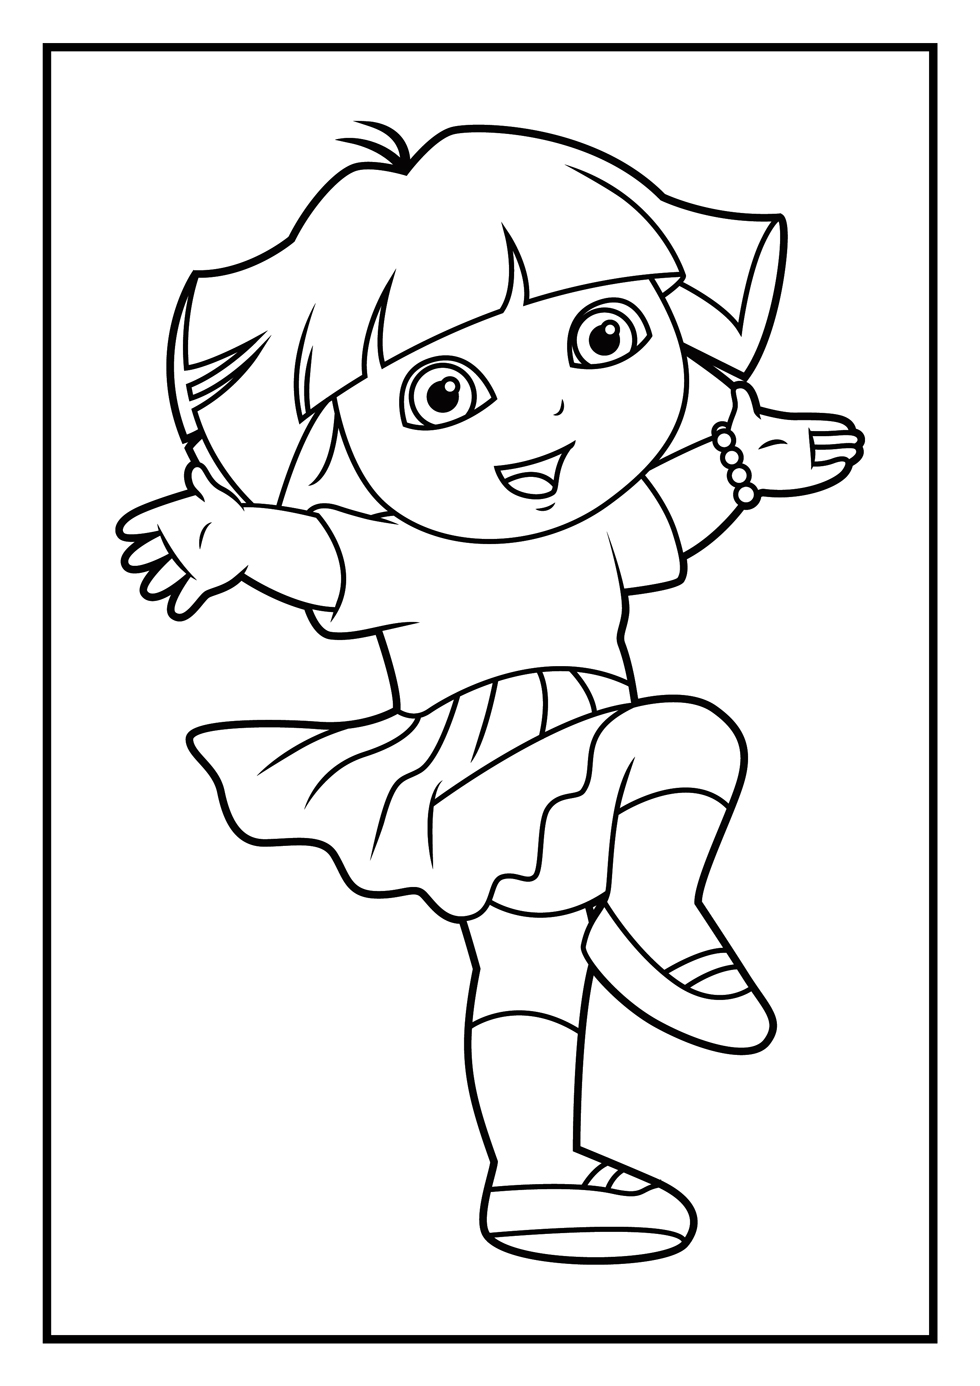 994 Animal Dora Coloring Pages Online Games with Printable